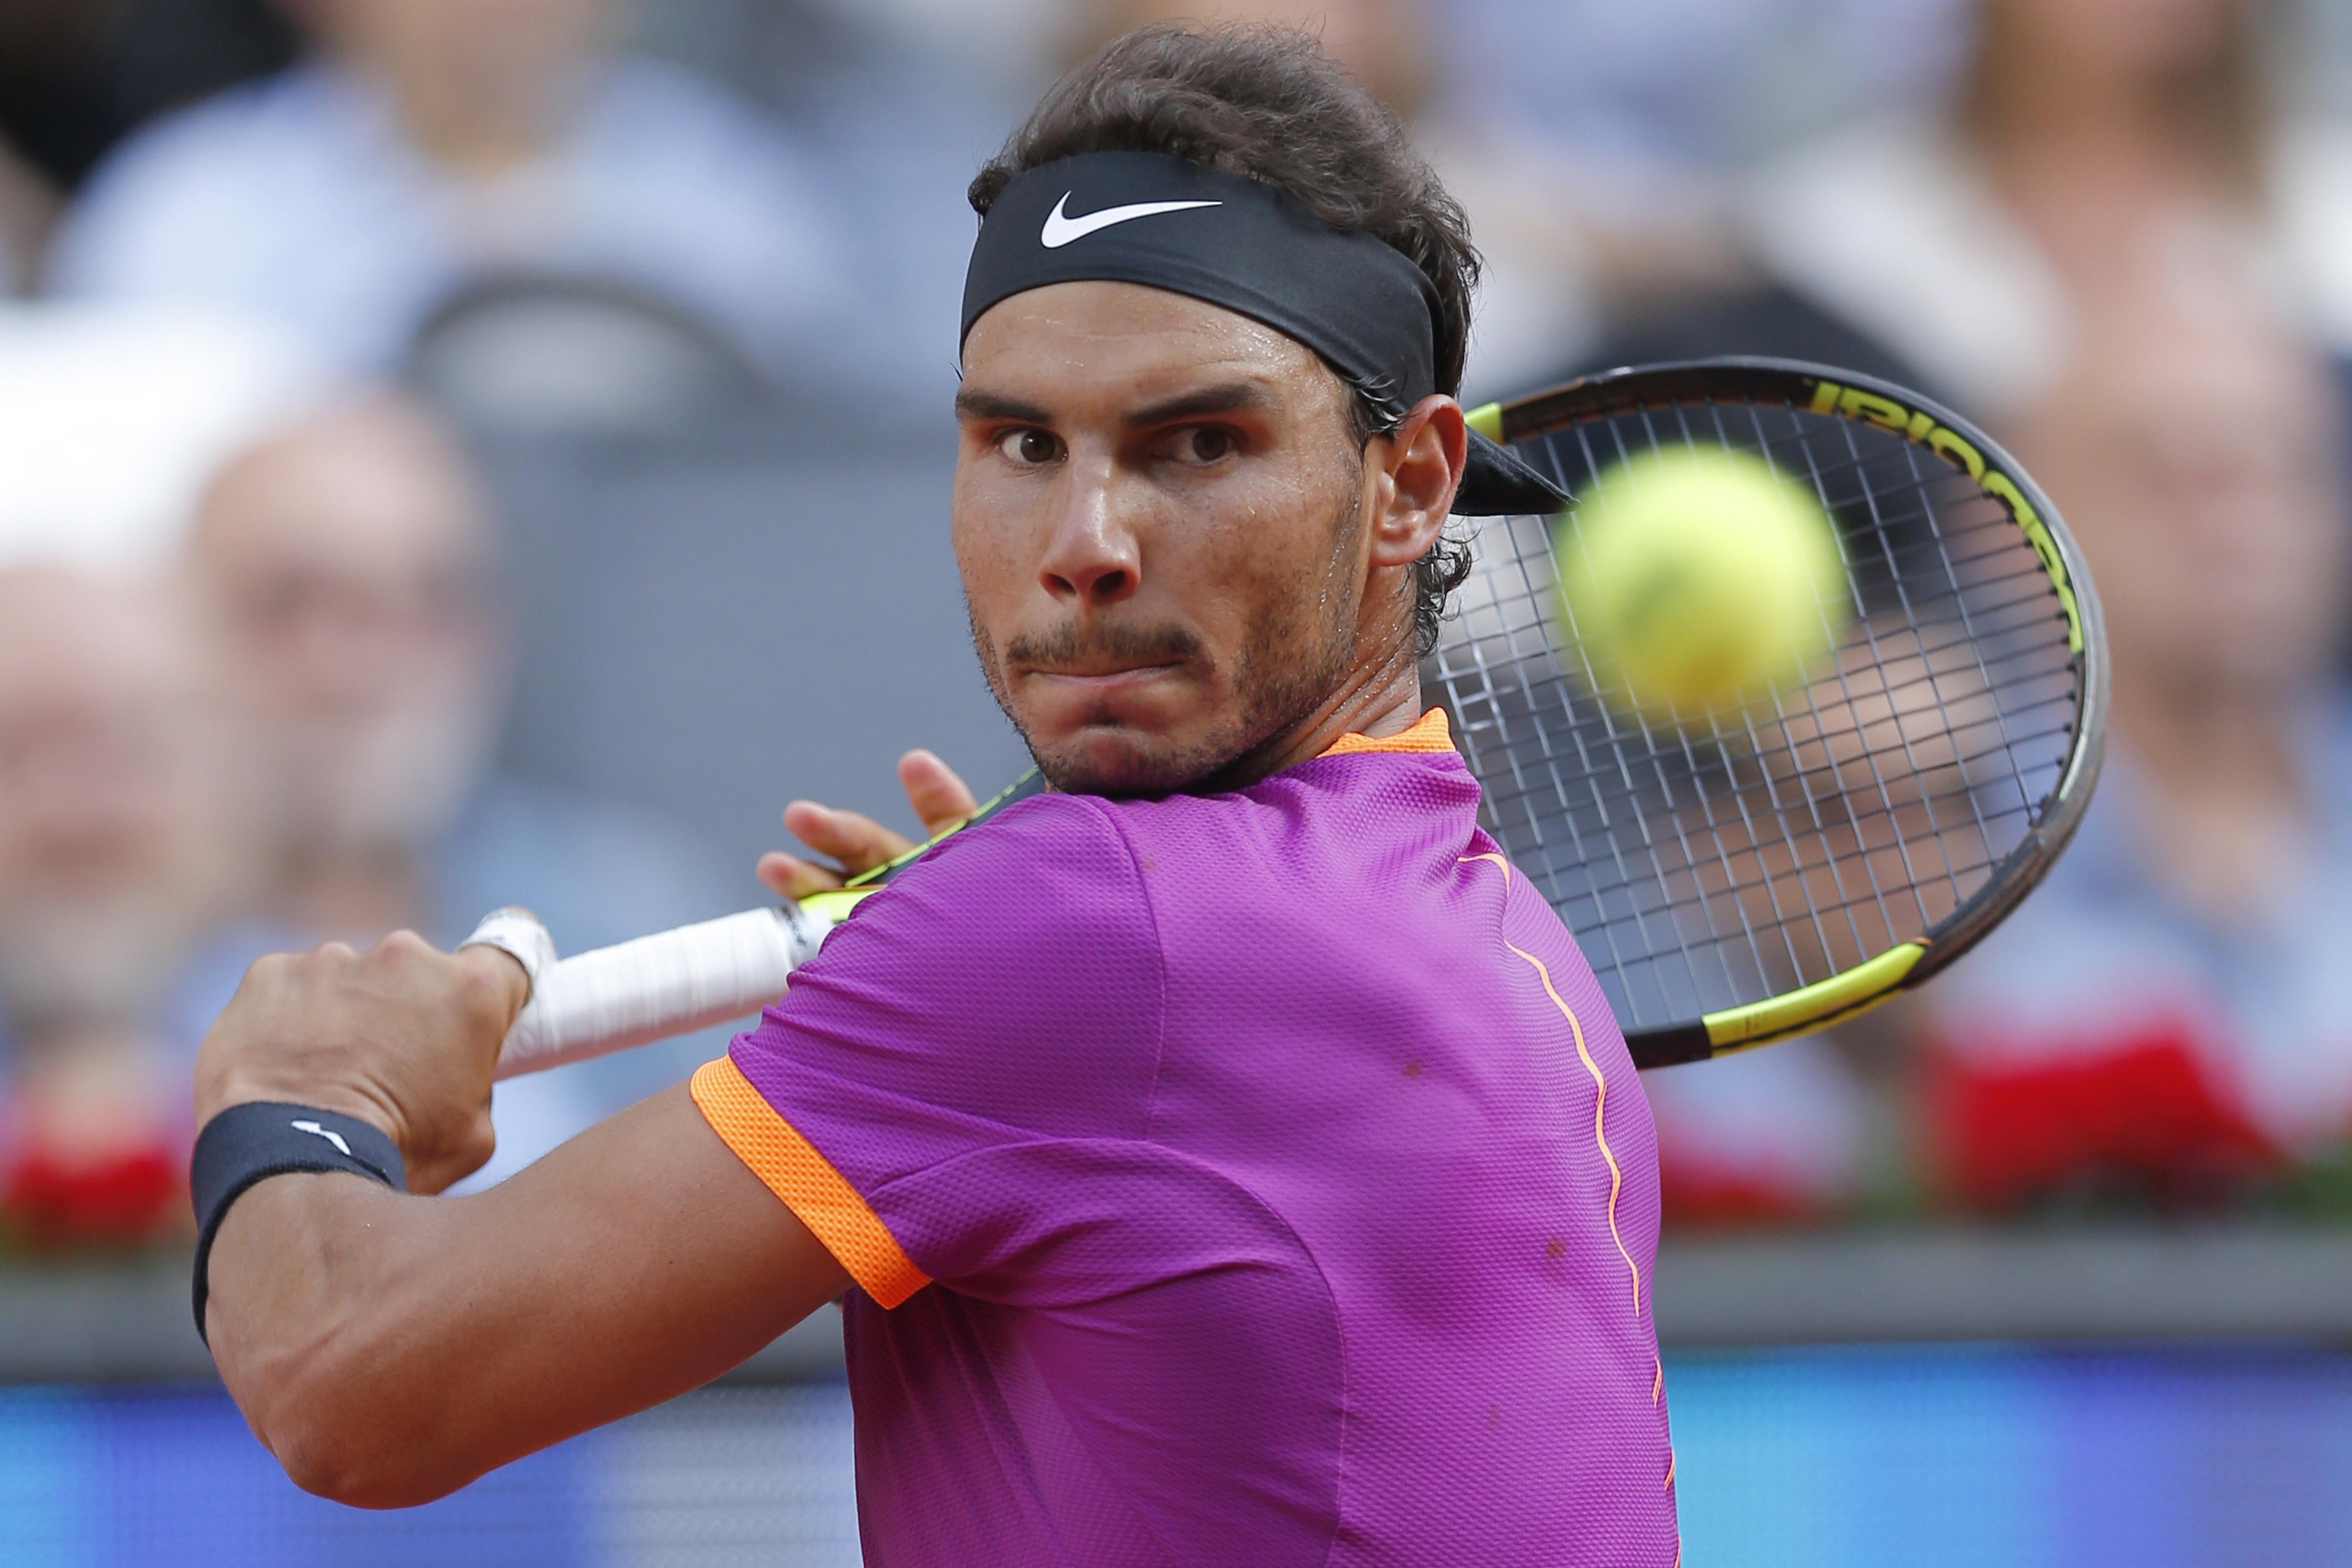 Nadal beats Thiem in Madrid, wins 3rd straight title The SpokesmanReview